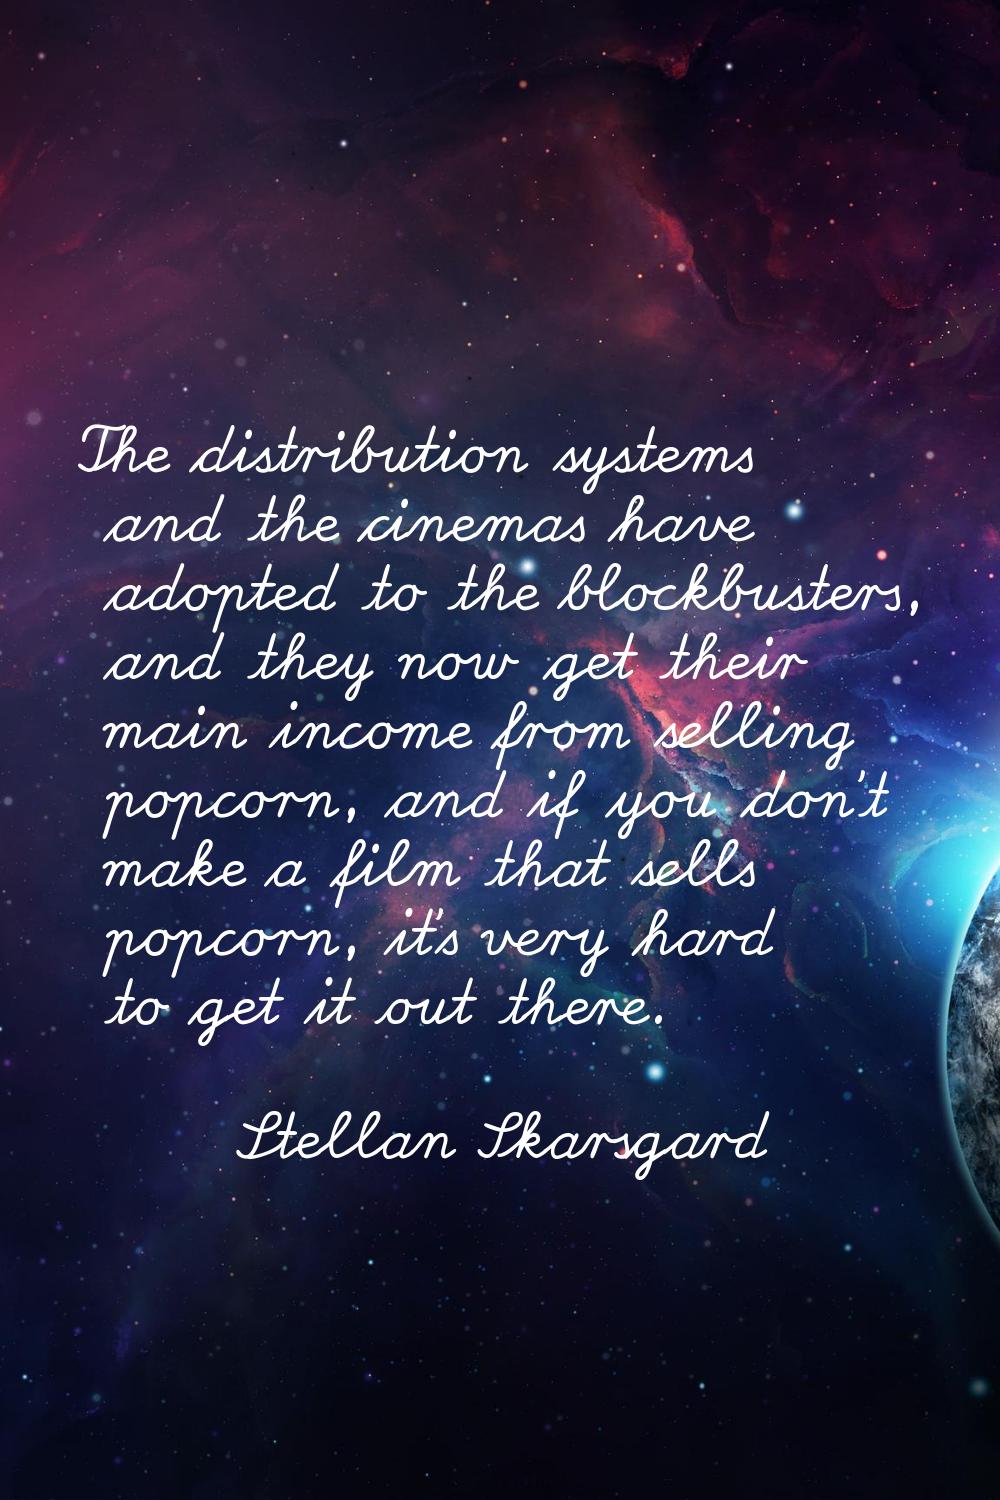 The distribution systems and the cinemas have adopted to the blockbusters, and they now get their m